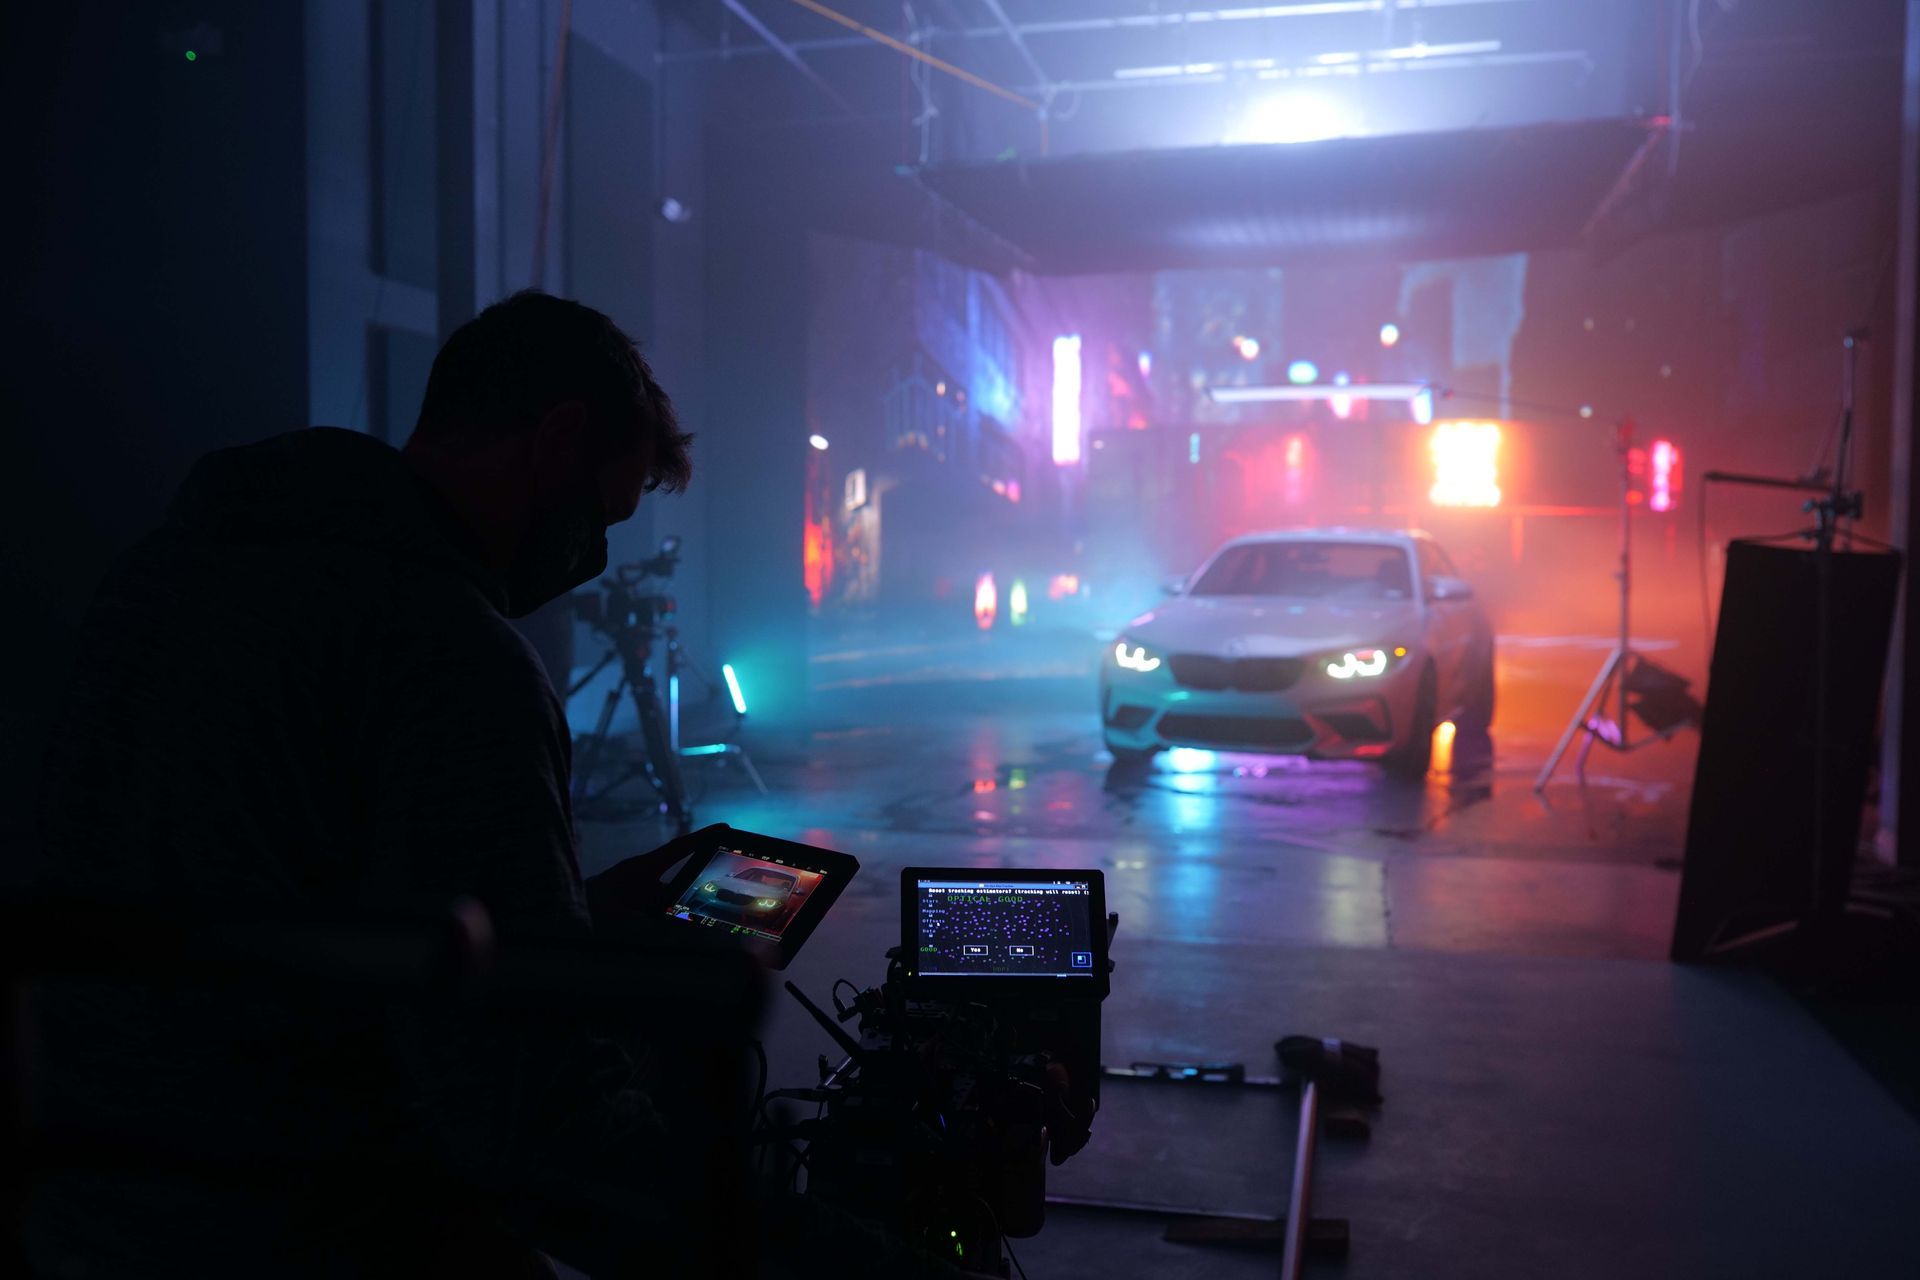 A man is holding a cinema camera in front of a car in a virtual production studio.